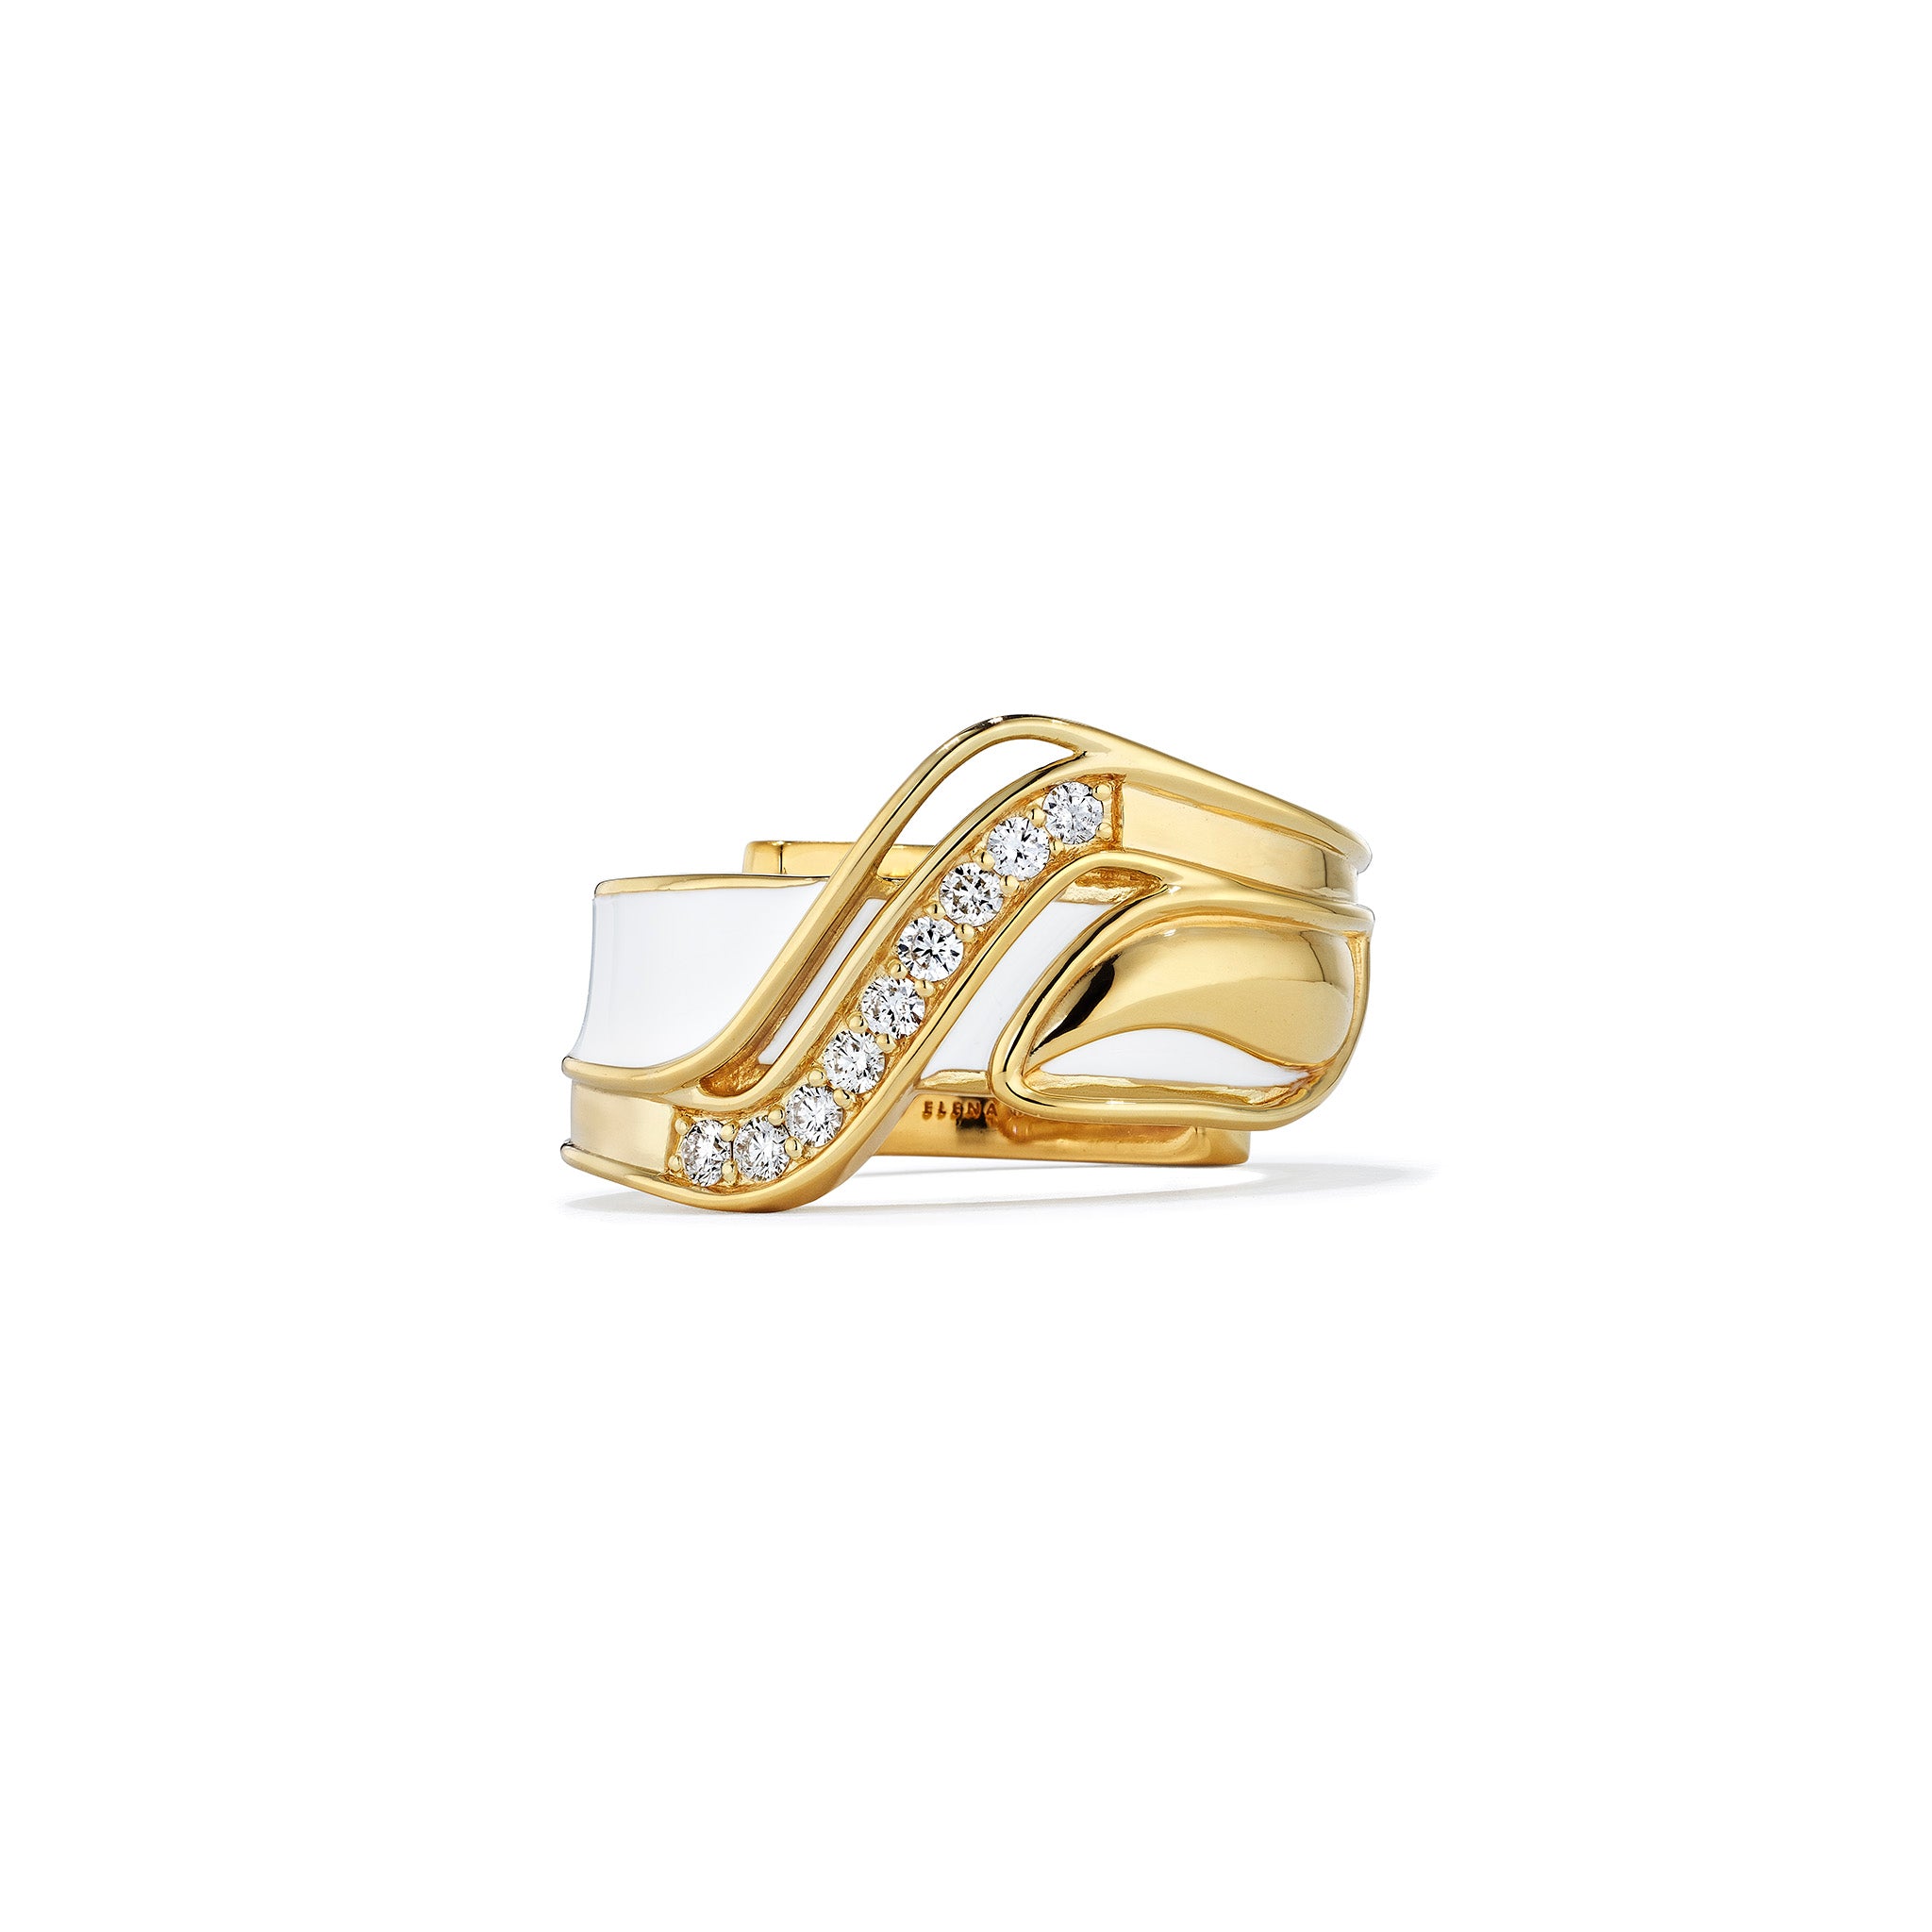 Adoro Band Ring With Diamonds In 18K Gold Vermeil